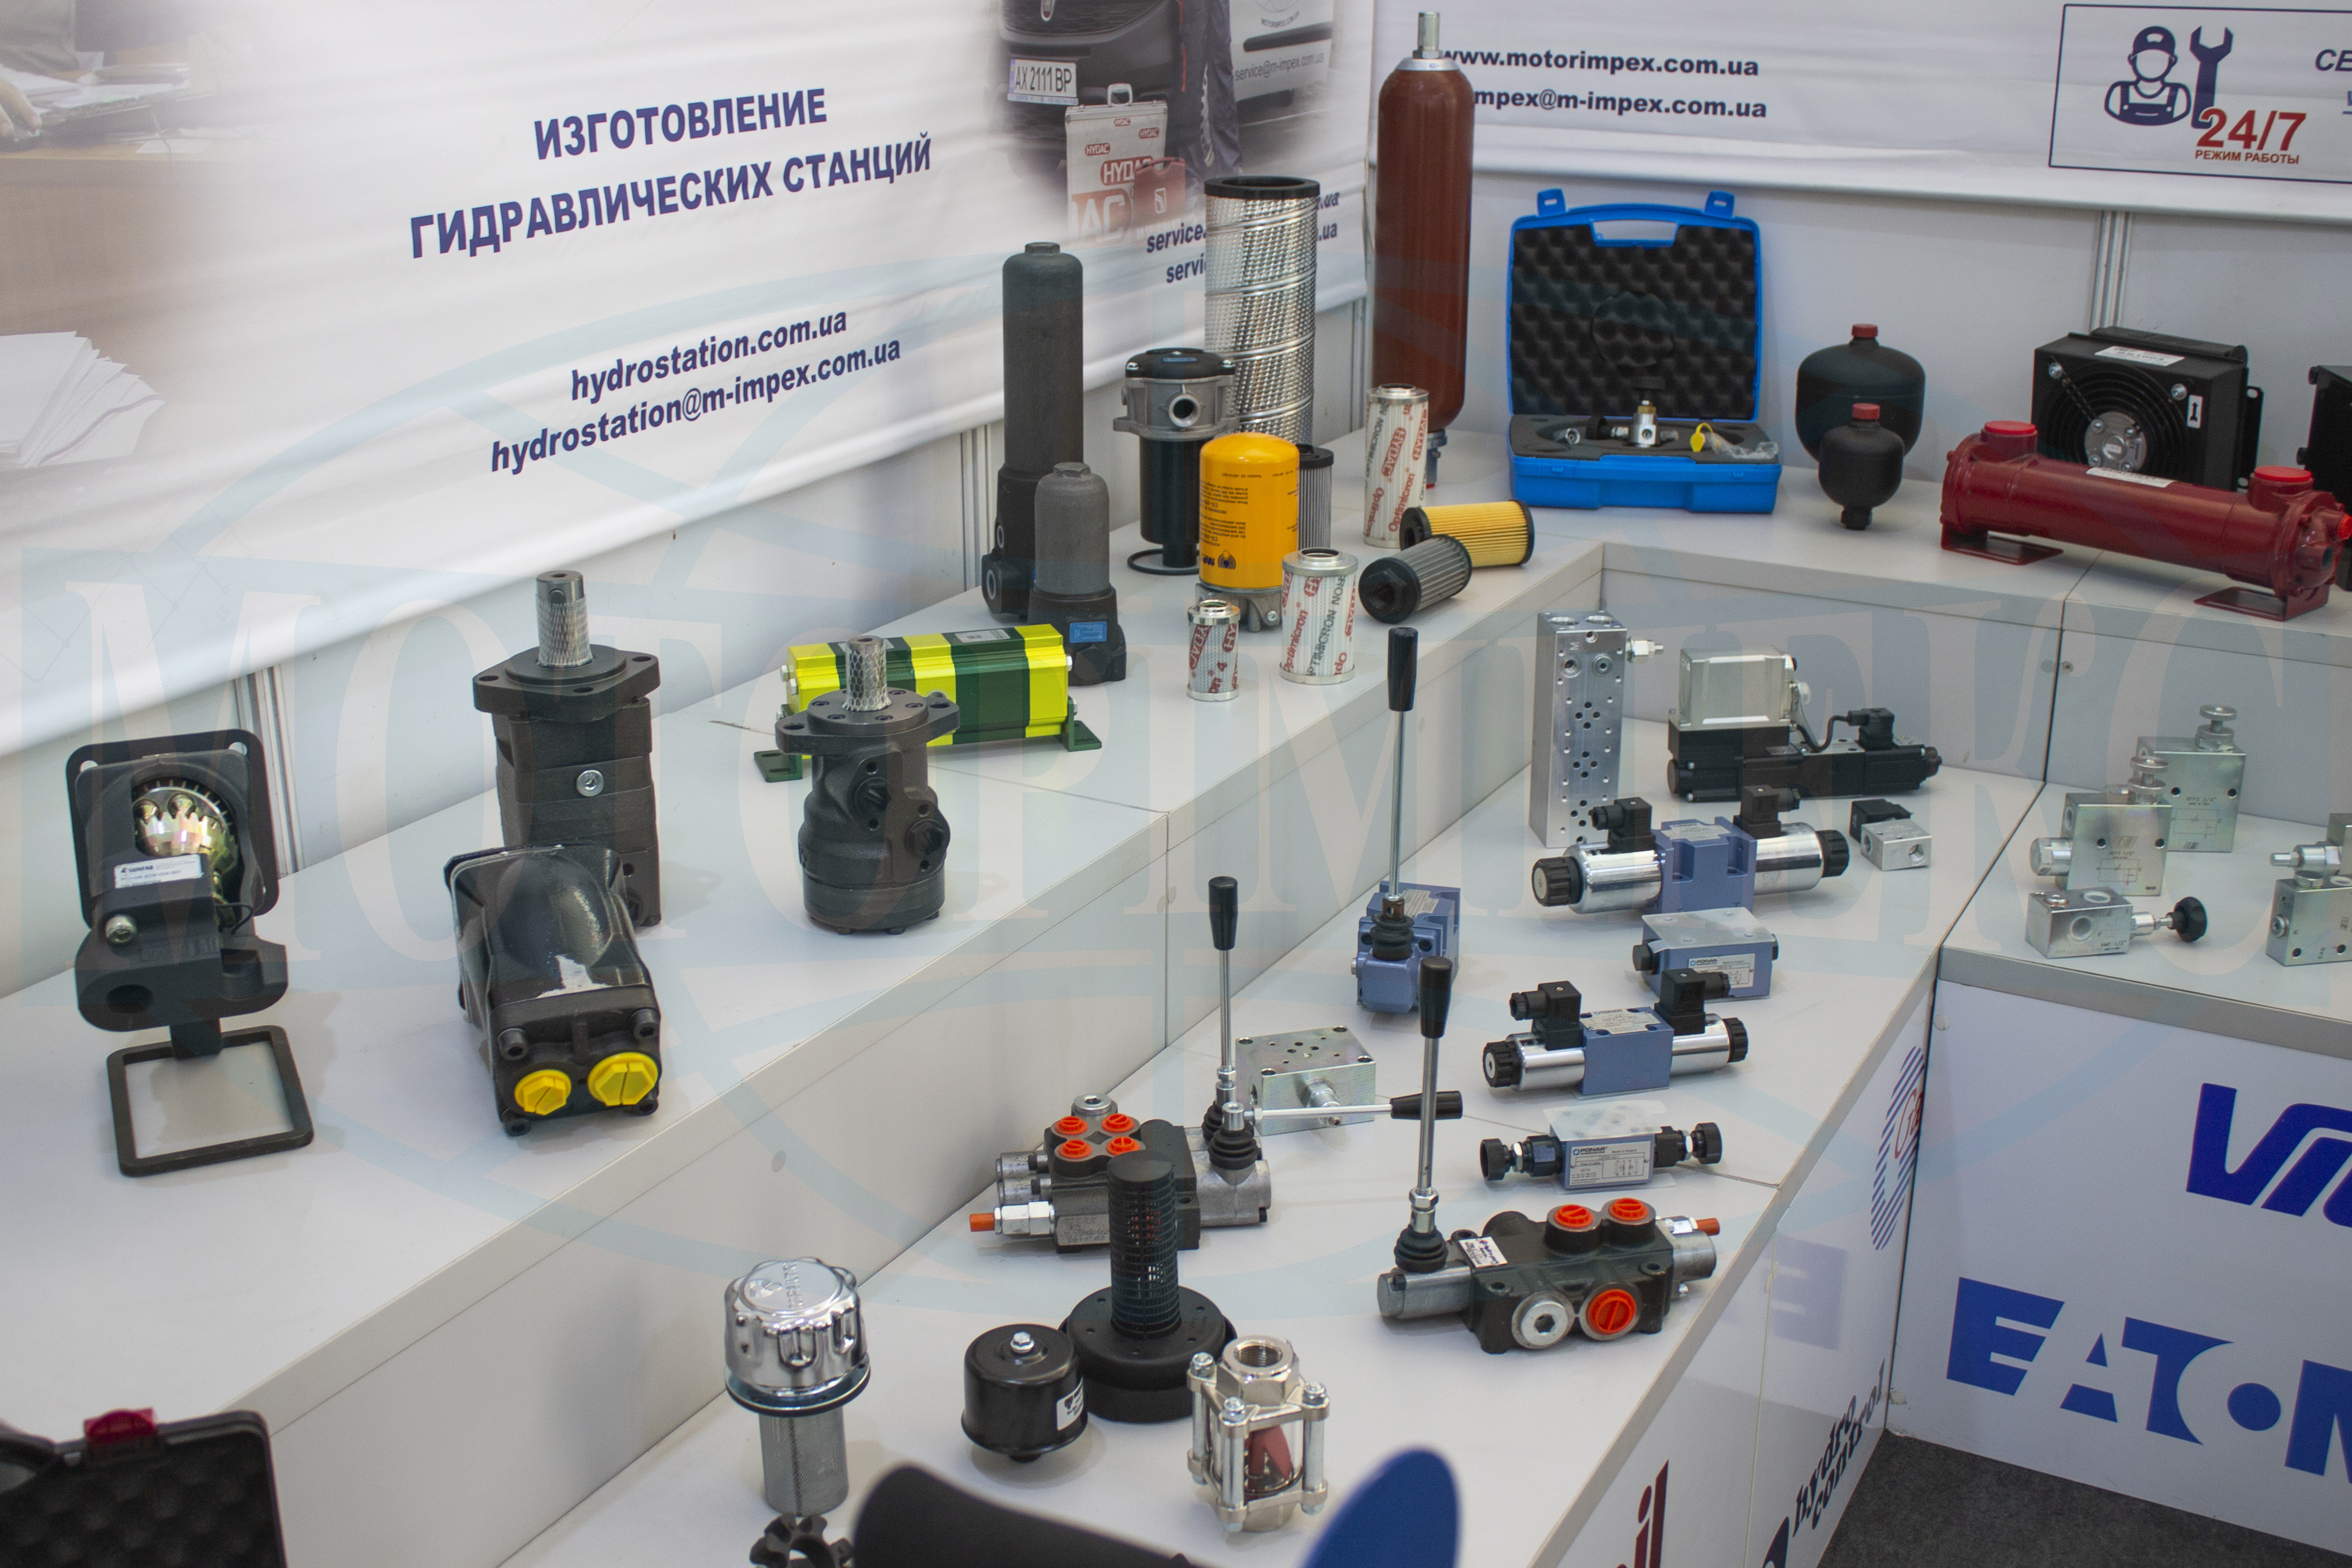 Hydraulics from 'Motorimpex' at the exhibition 'Shipbuilding-2019'